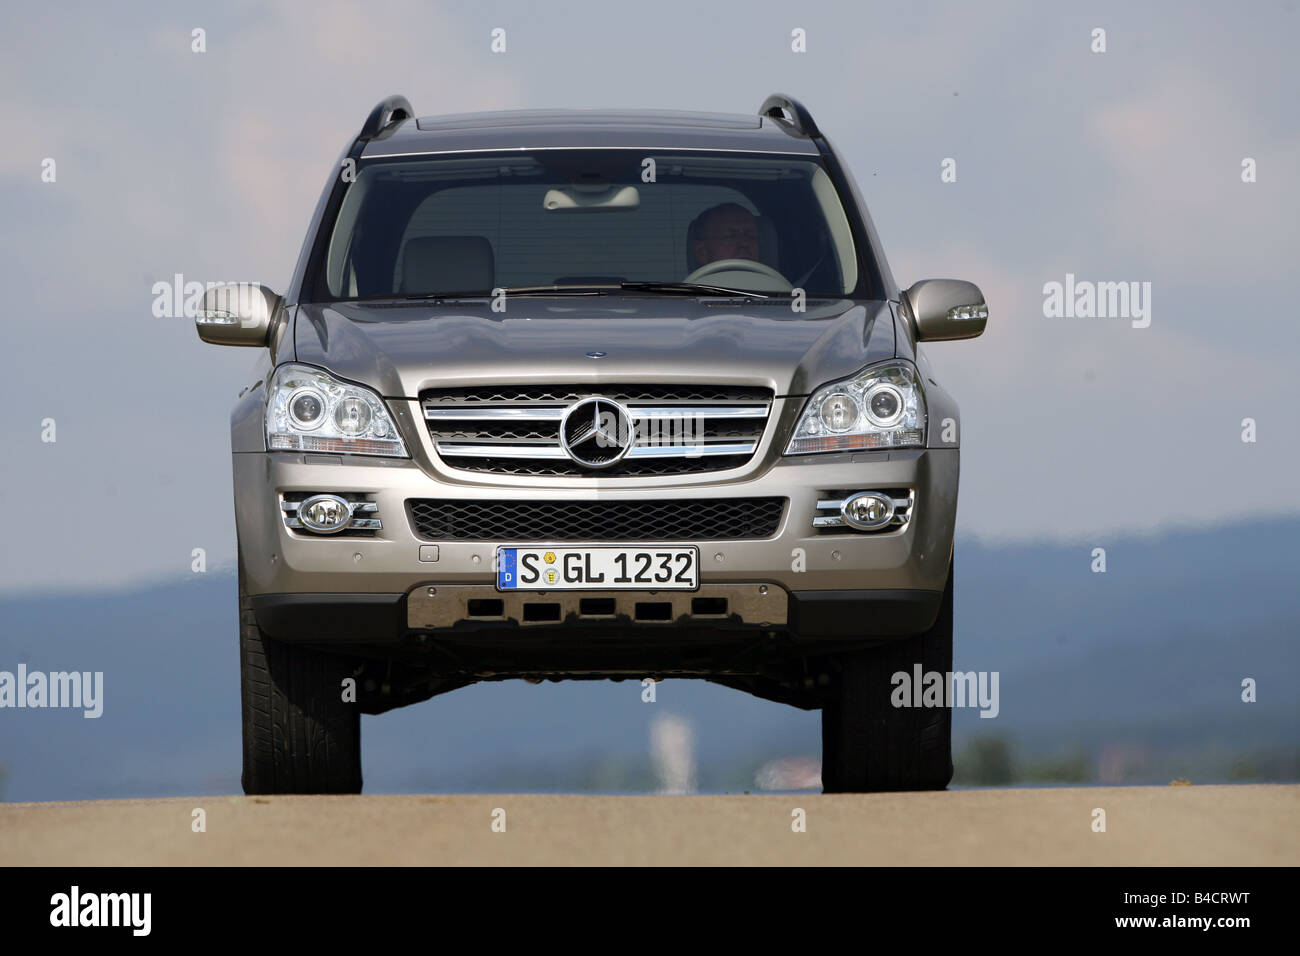 Mercedes GL 420 CDI, model year 2006-, silver, standing, upholding, frontal view Stock Photo